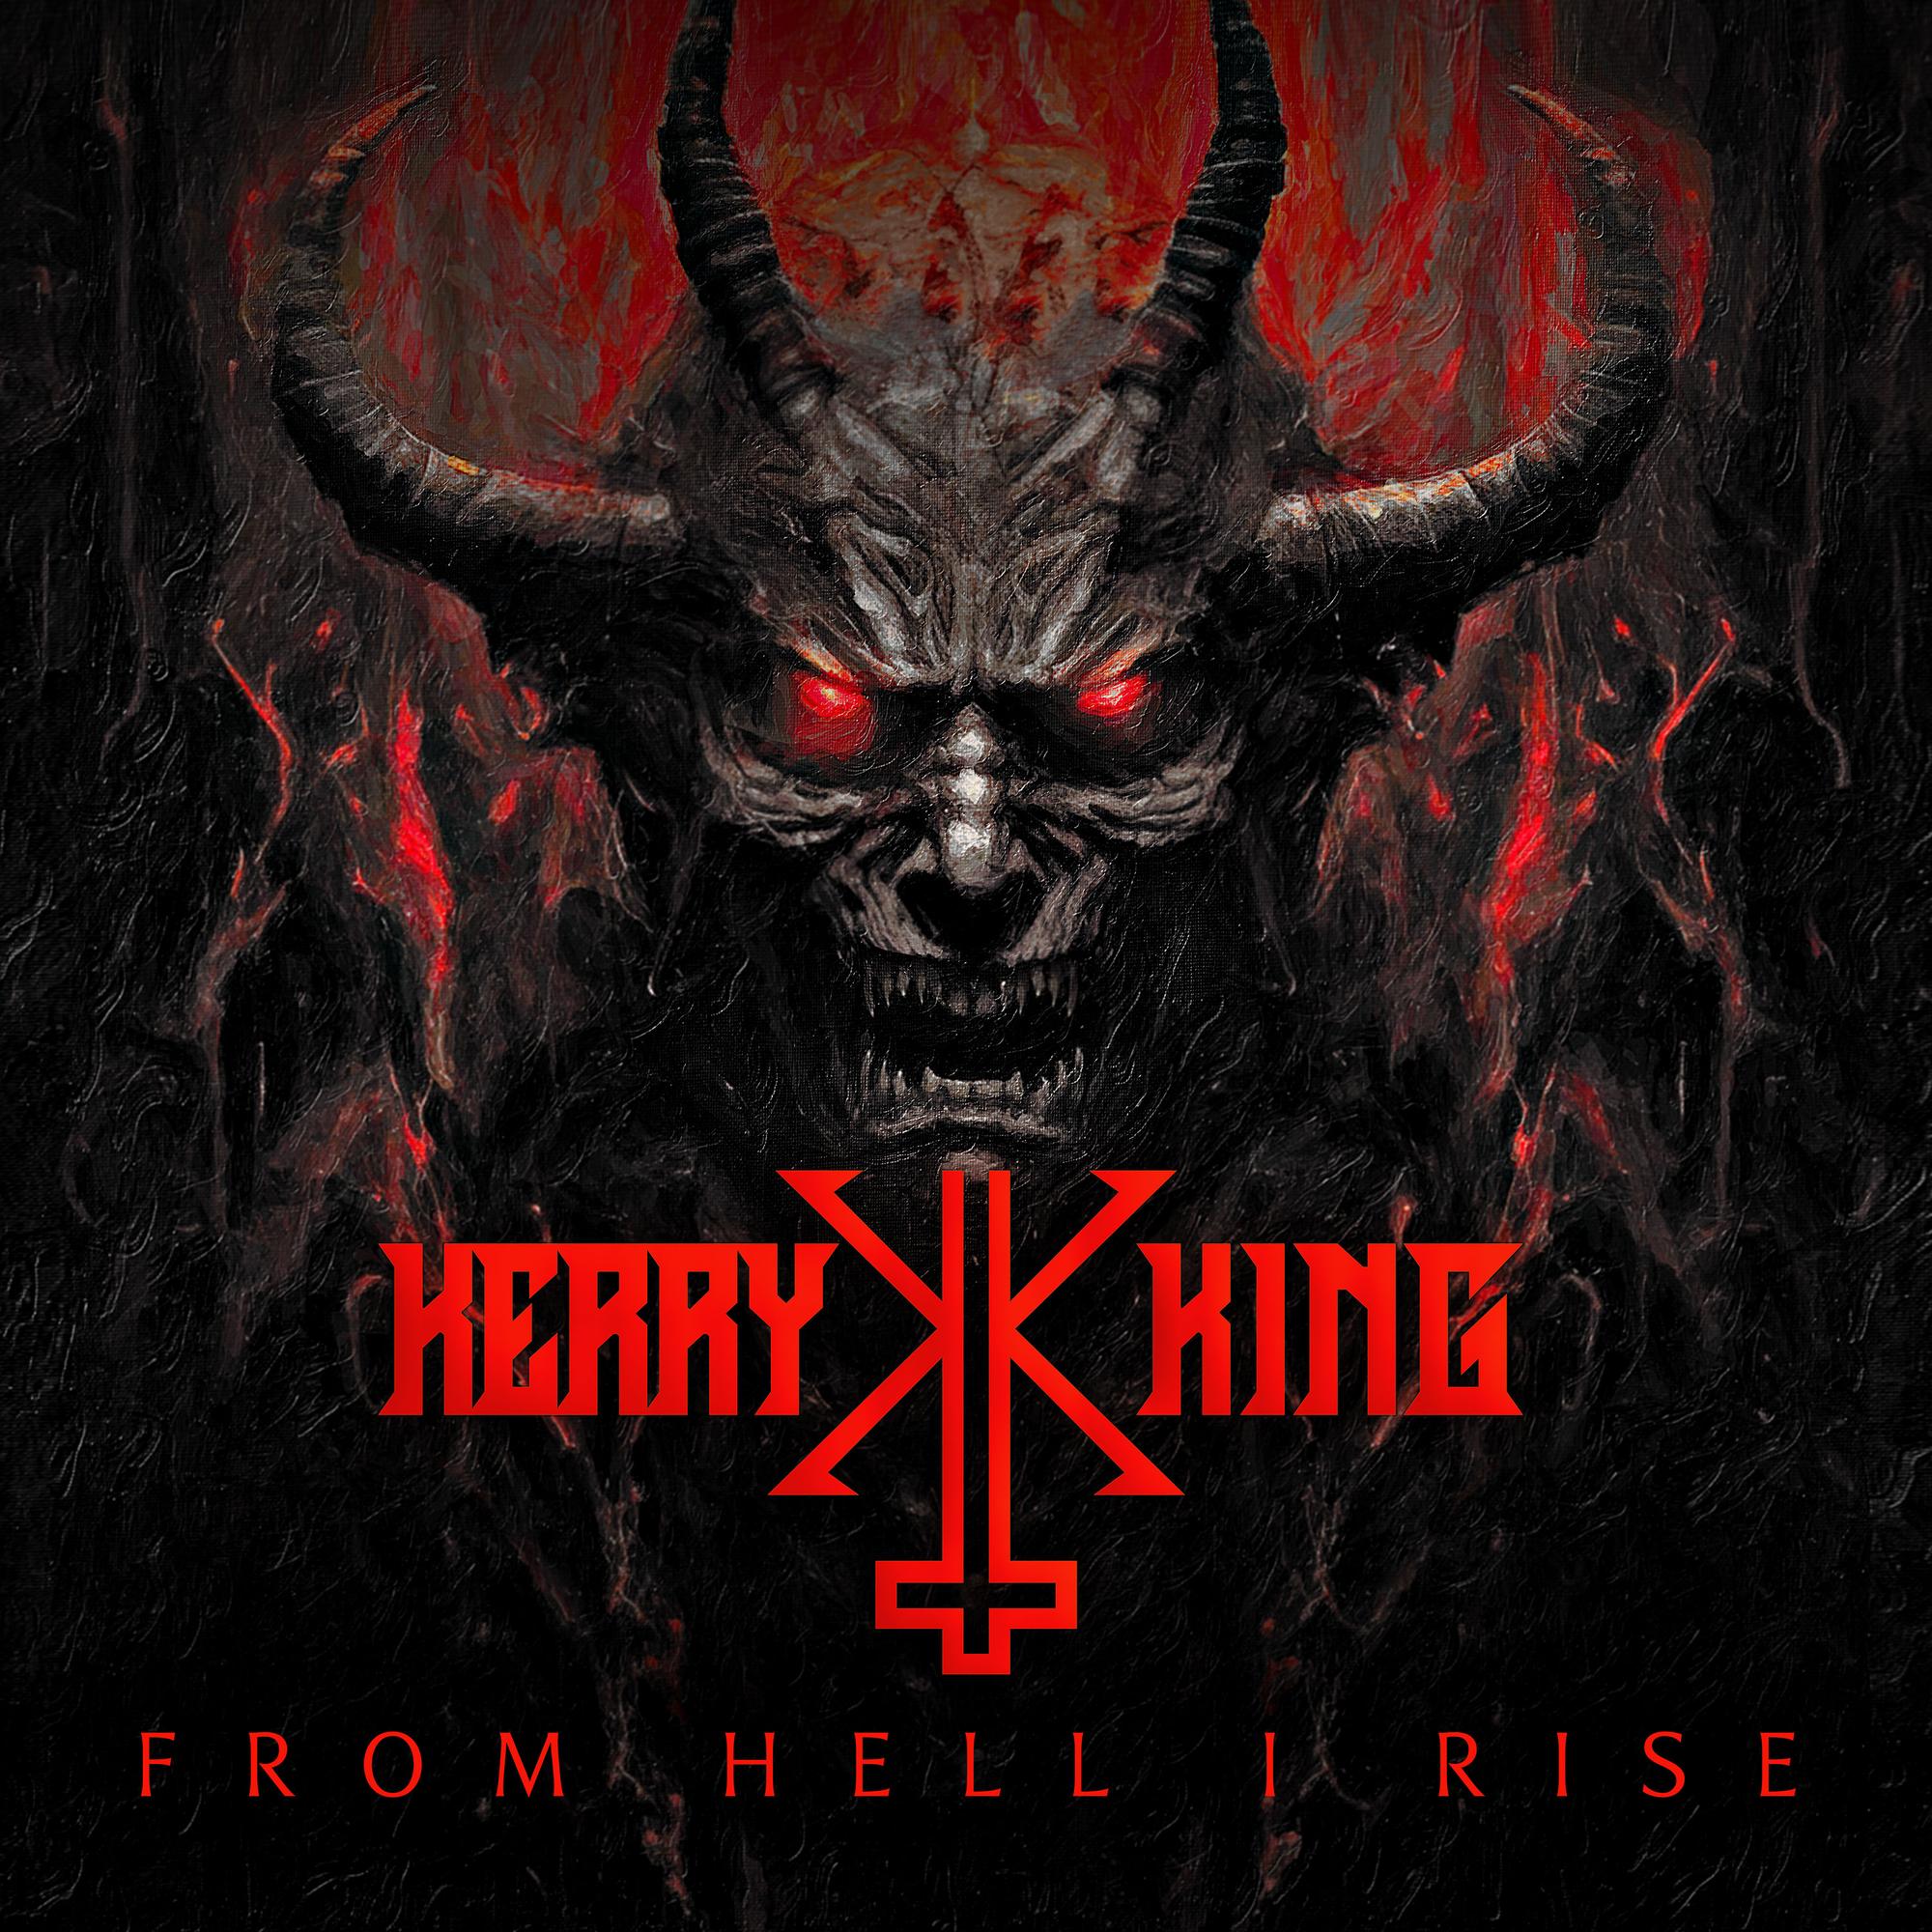 Kerry King "From Hell I Rise" Black Vinyl - PRE-ORDER